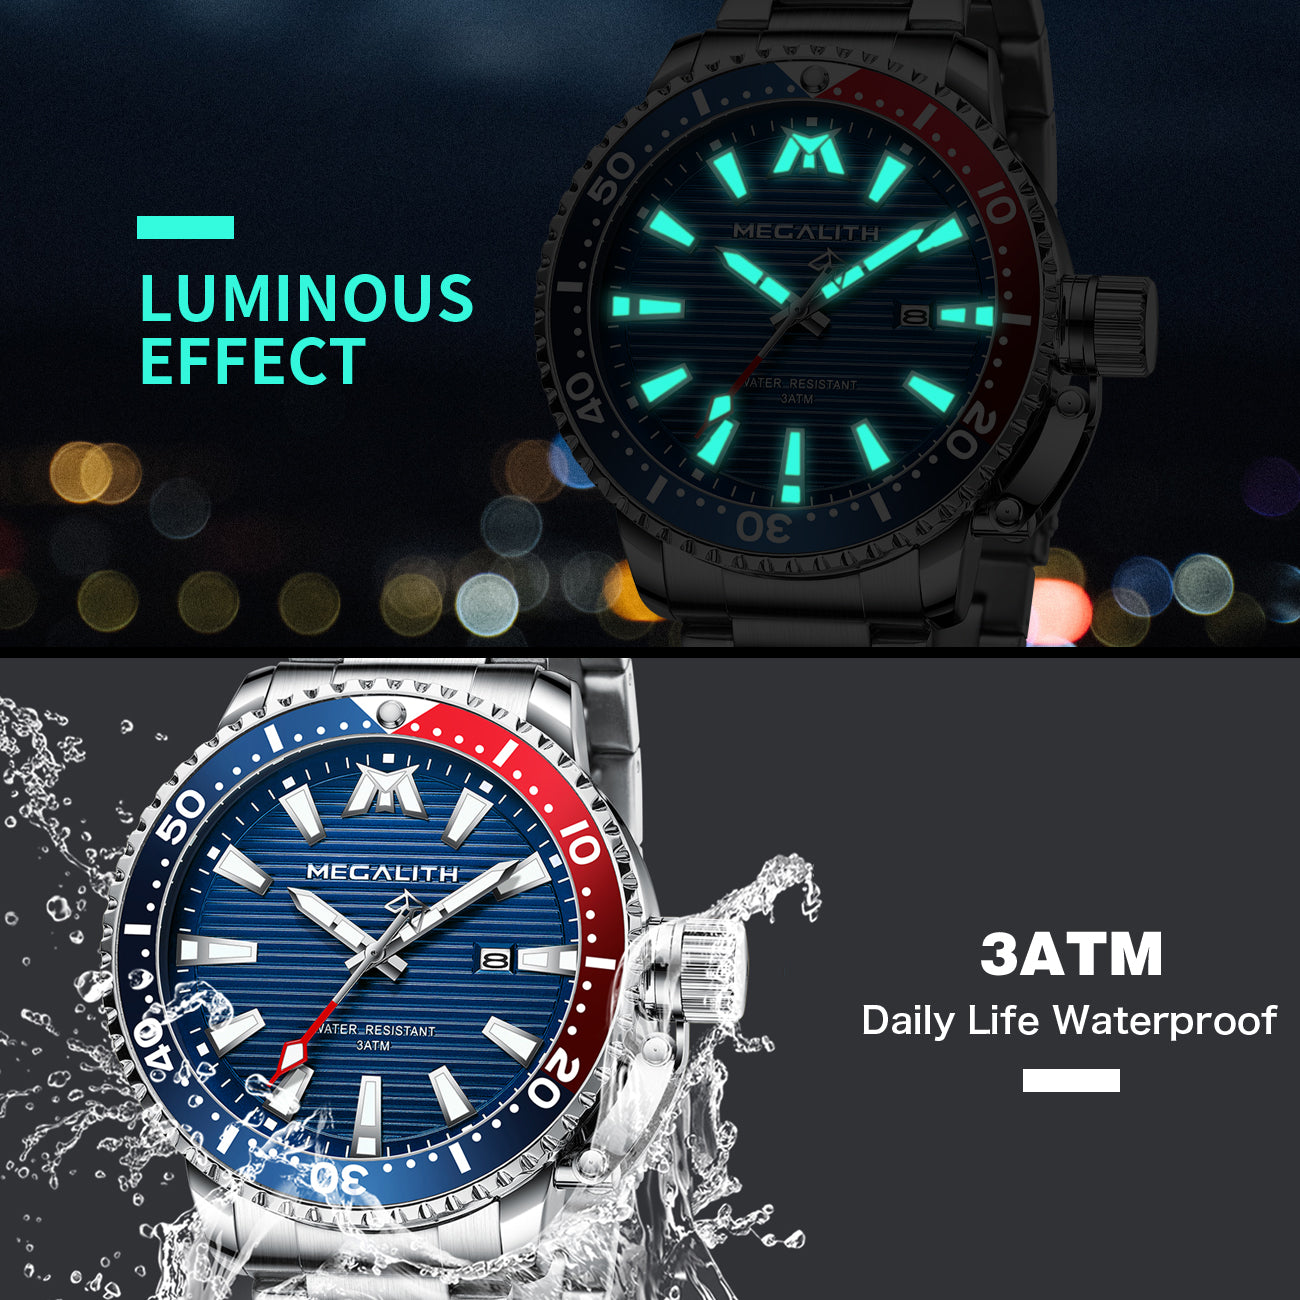 MEGALITH Mens Watches Men Designer Luminous Waterproof Stainless Steel Wrist Watch Big Face Date Calendar Business Fashion Casual Dress Analogue Watches for Man